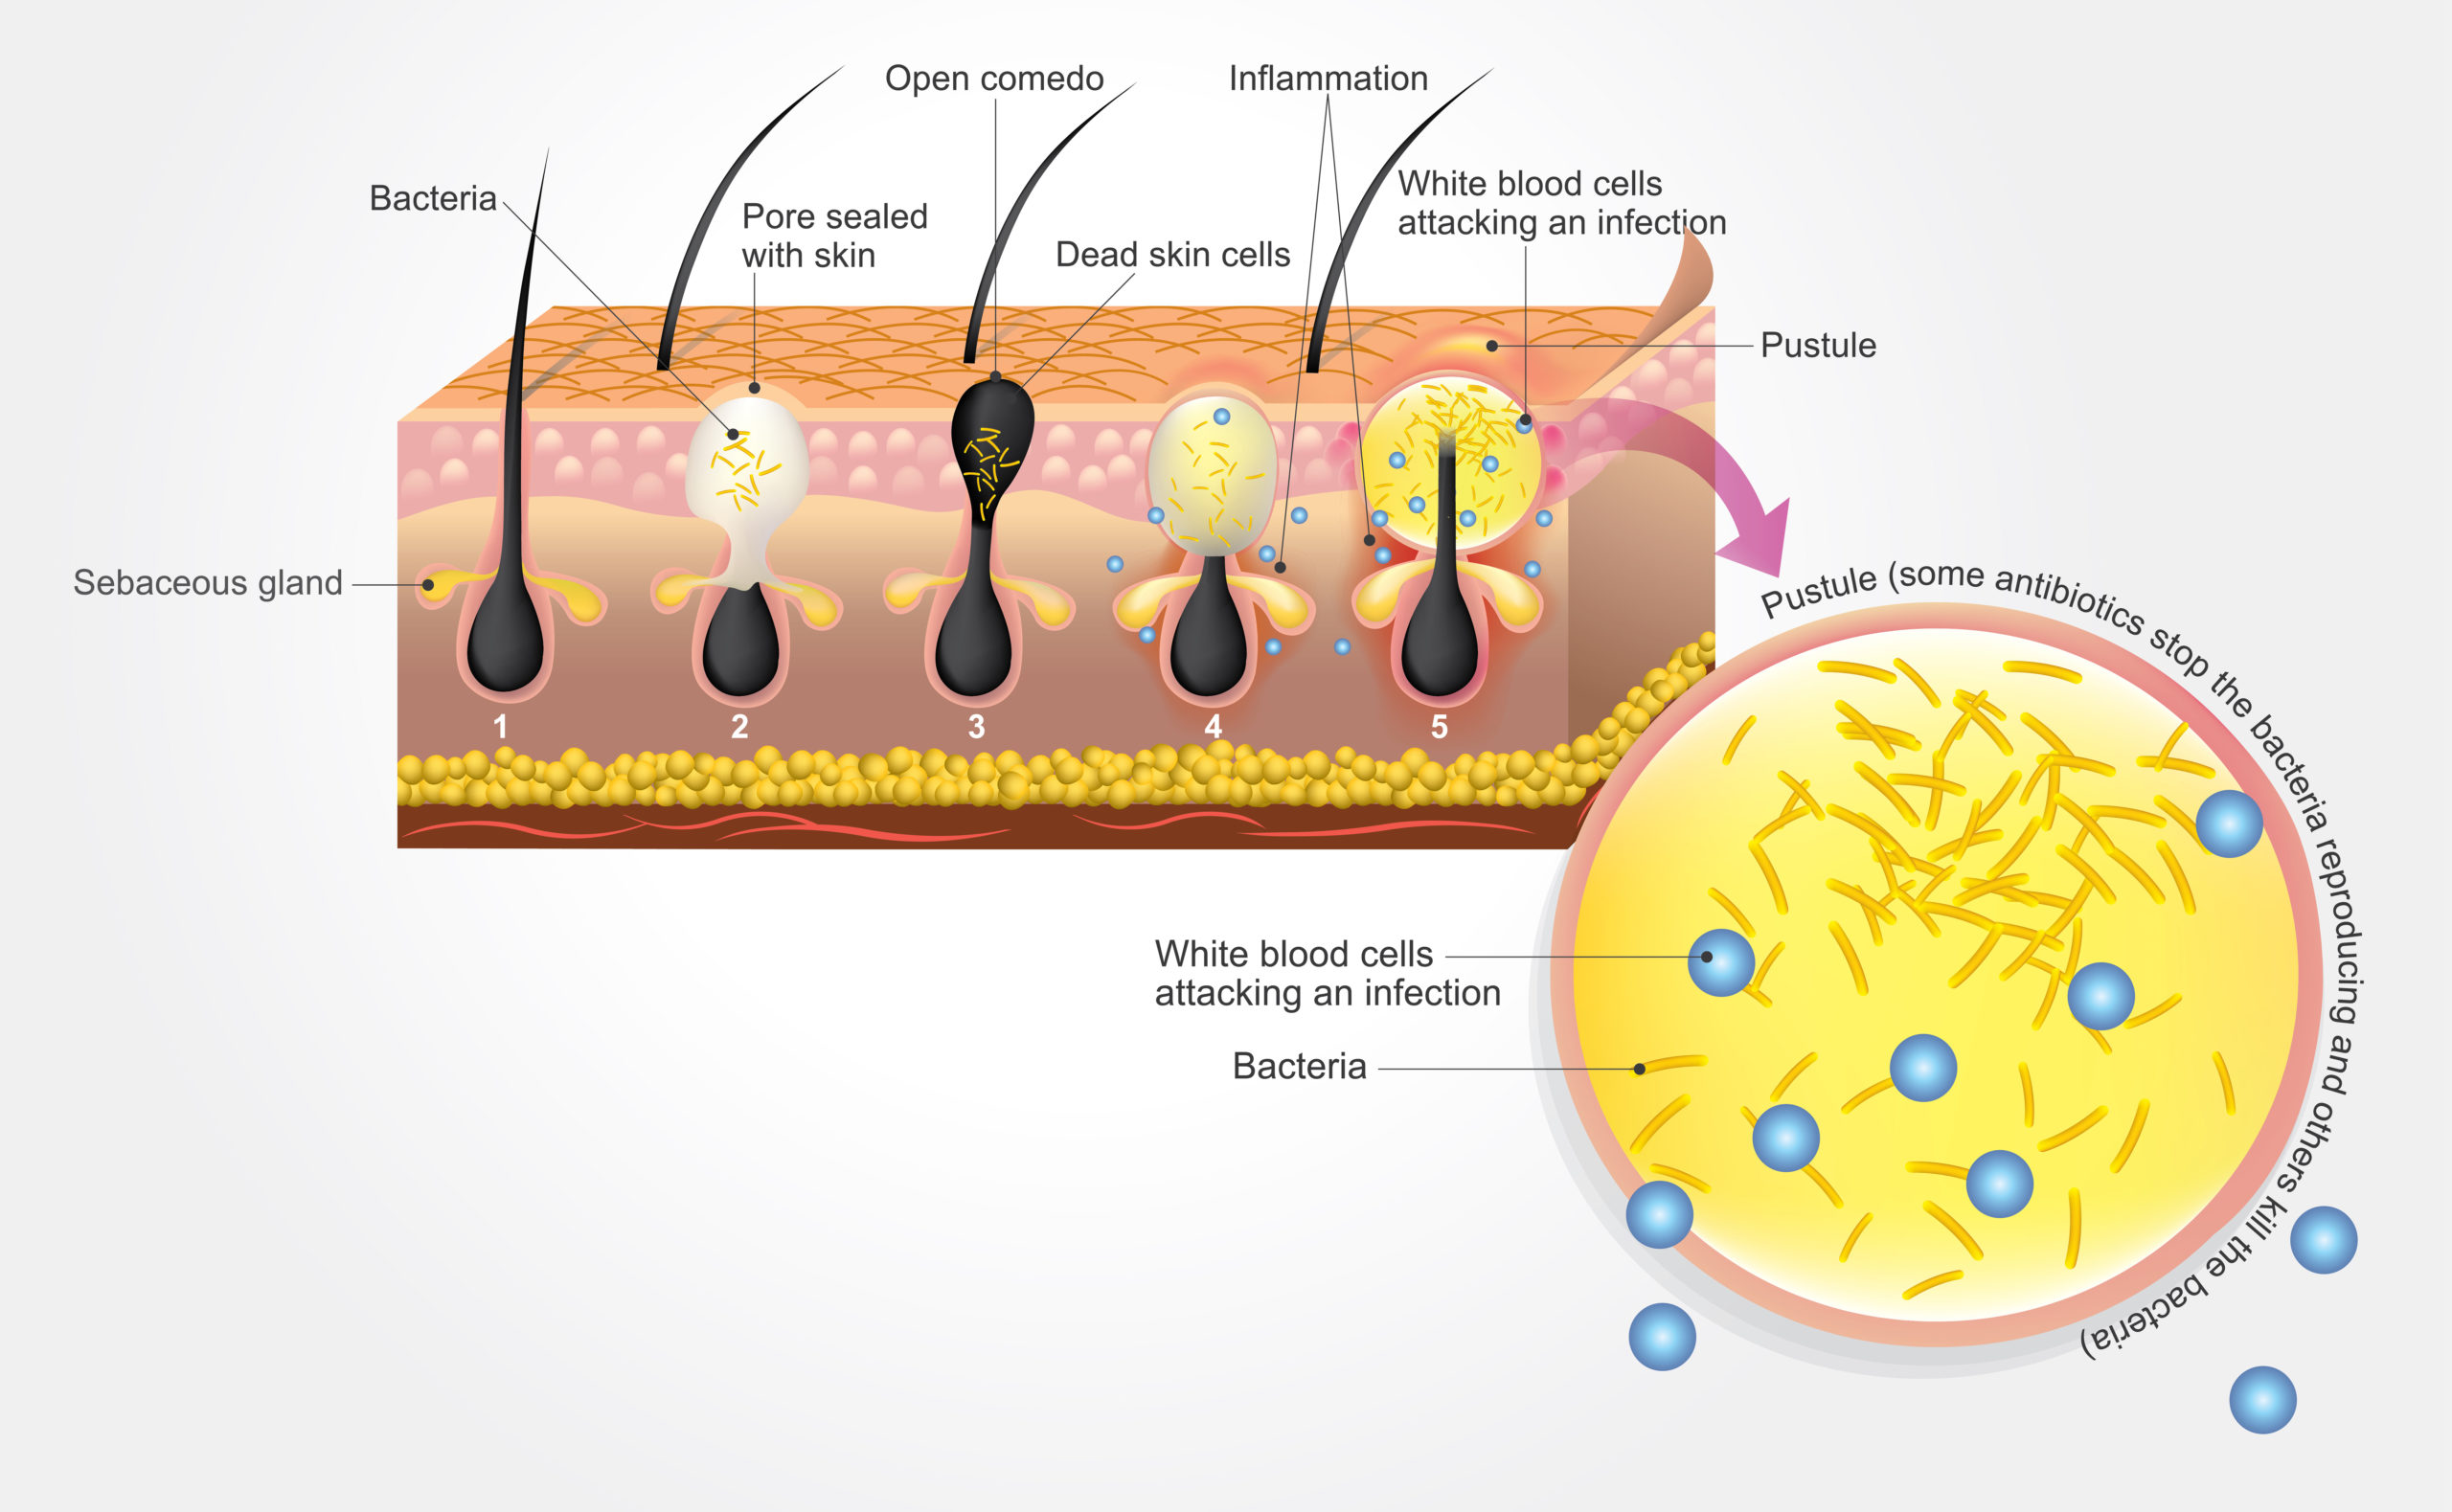 Mechanism of acne formation due to bacteria